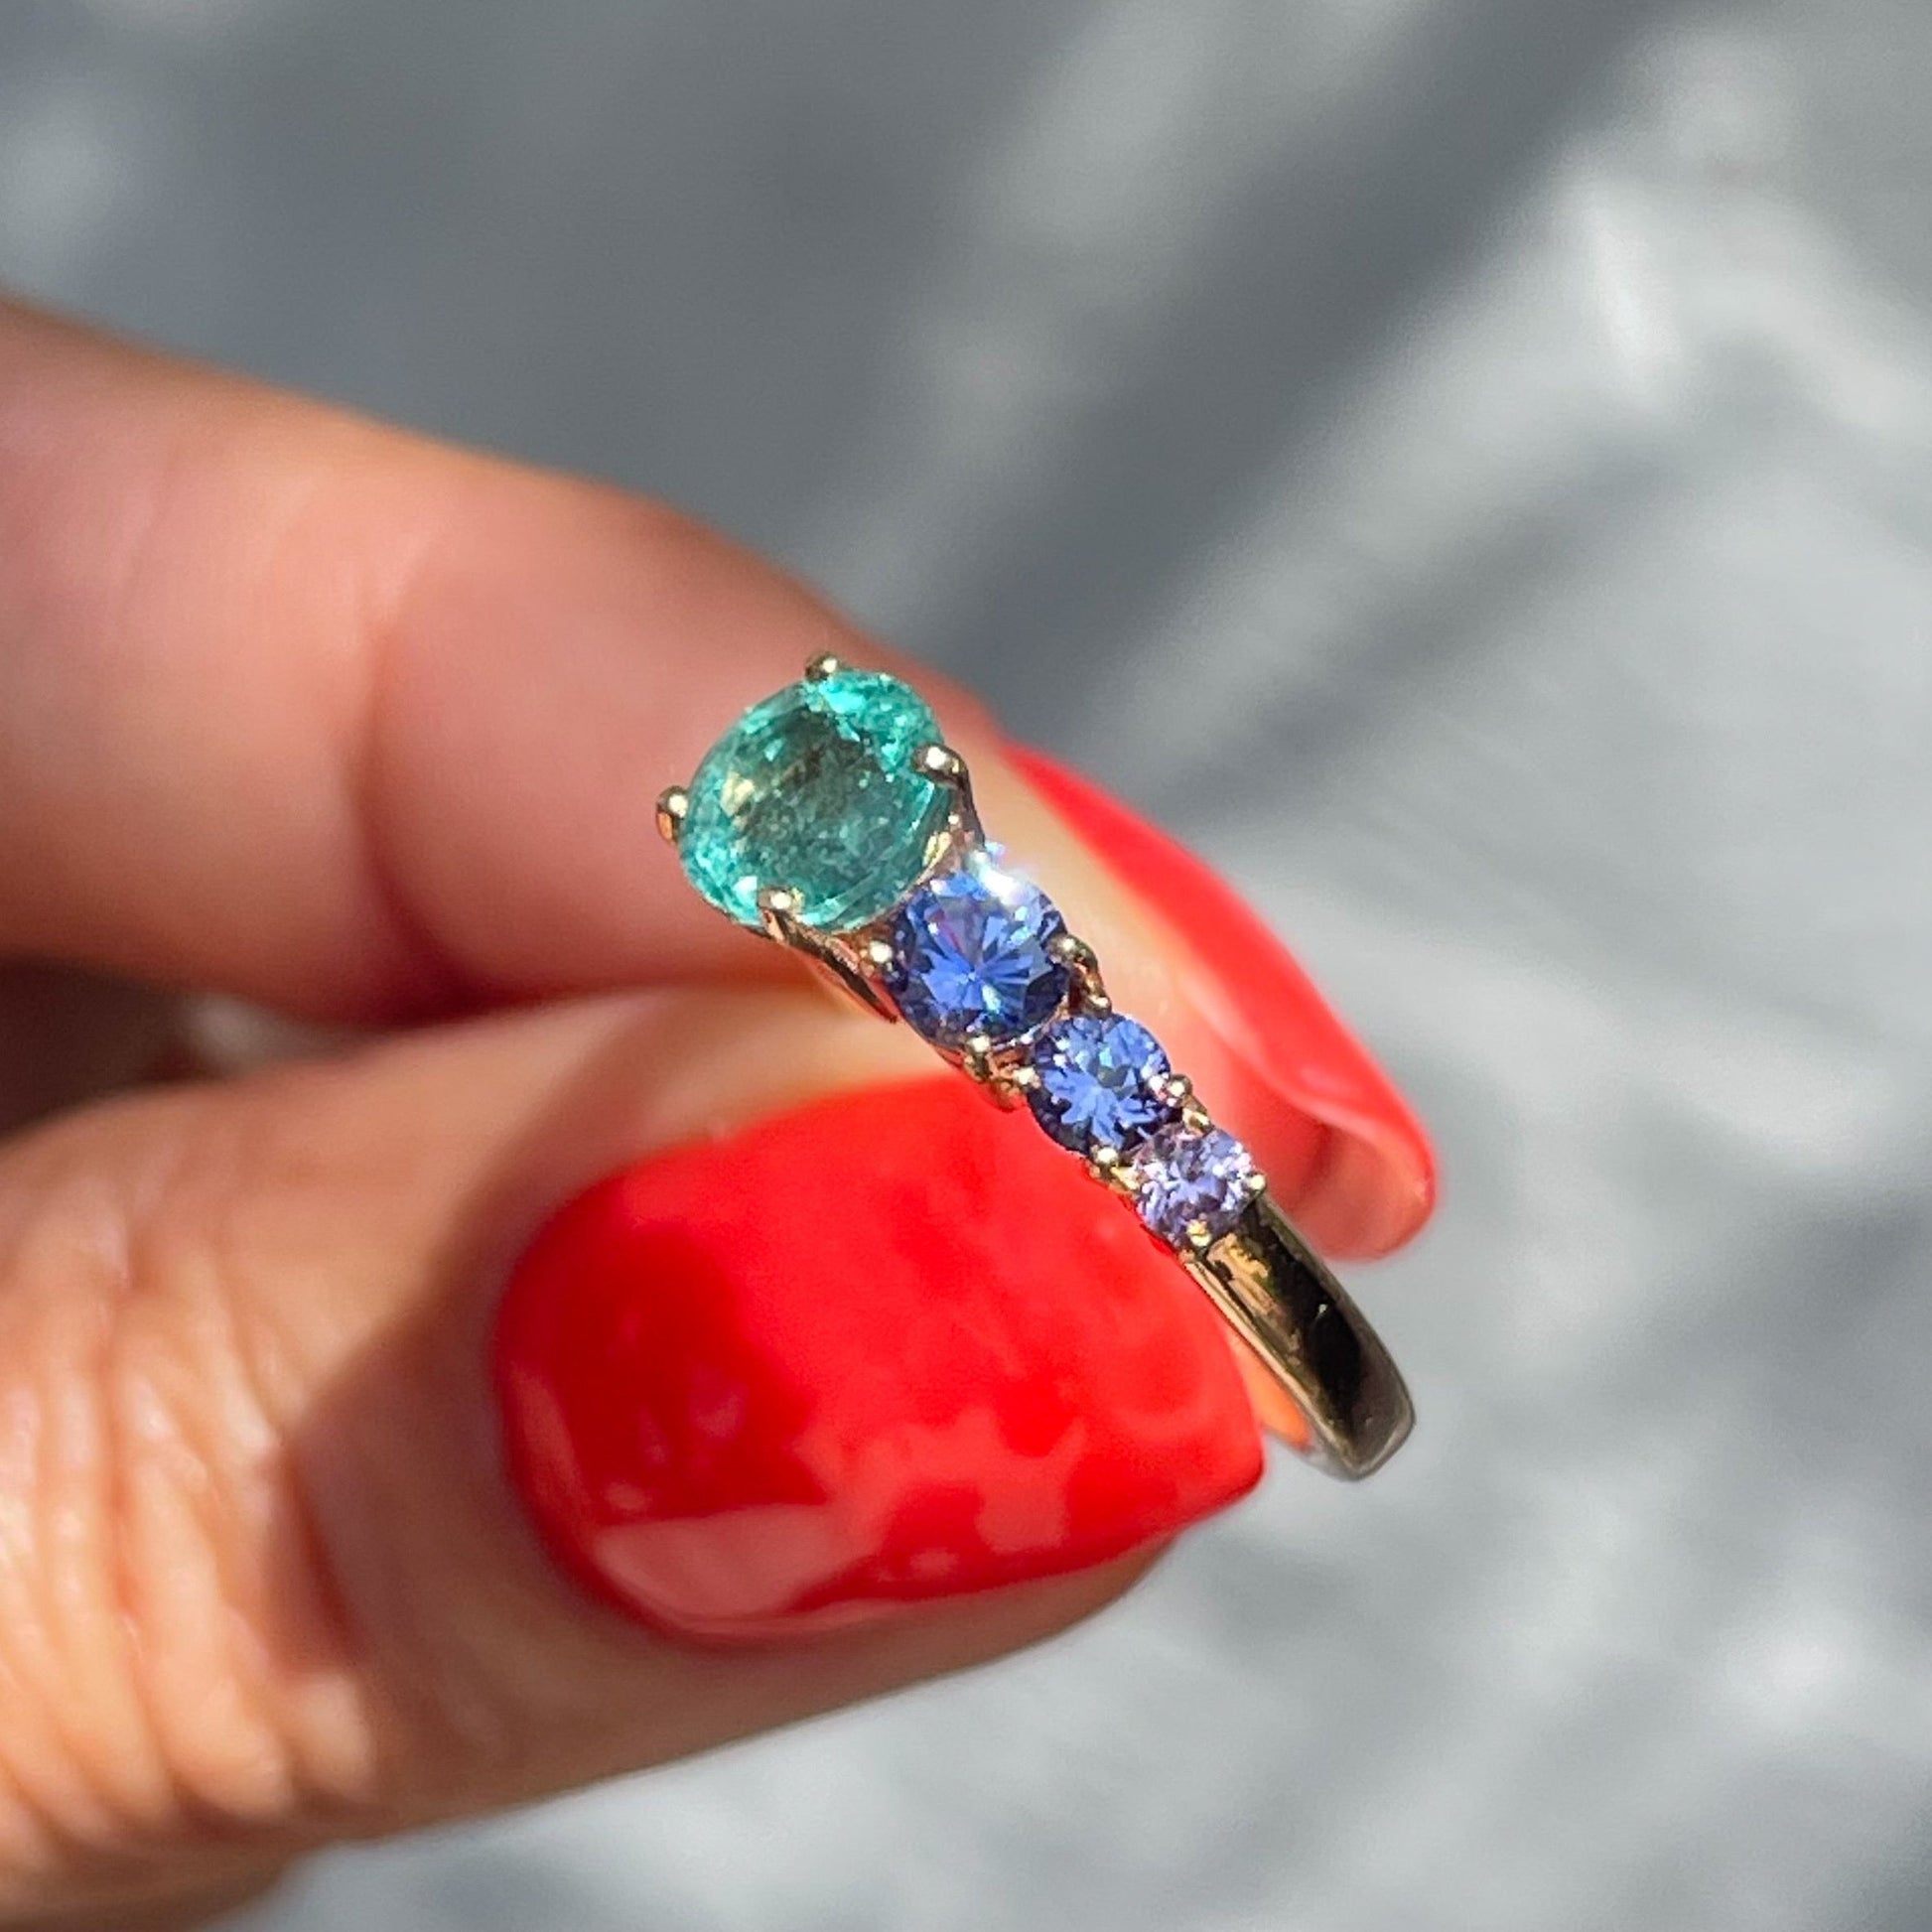 A Colombian Emerald Ring by NIXIN Jewelry held in sunlight showing its sapphire side. The opposite side of this emerald and purple sapphire ring has a row of pave diamonds.